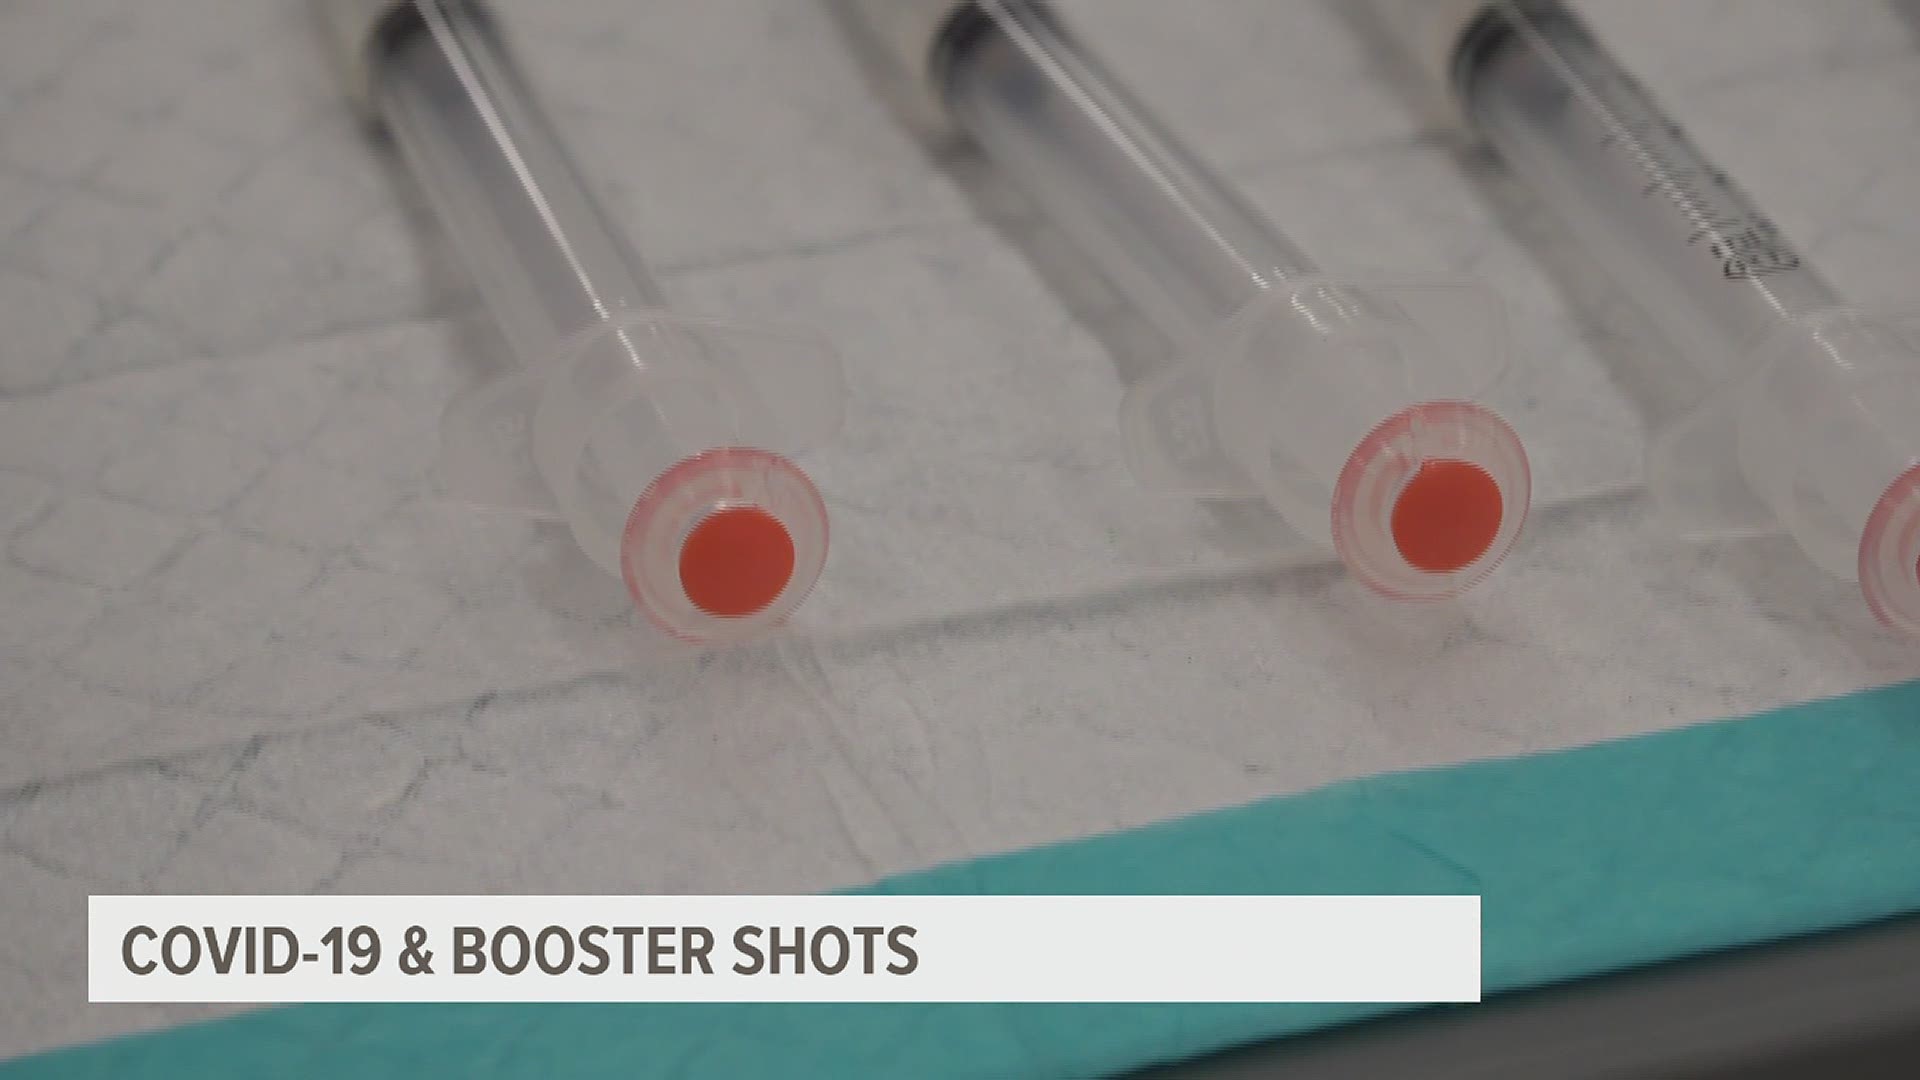 "I left my crystal ball at home," said one local doctor who was asked about booster shots, even though he admits he personally believes boosters may be needed.